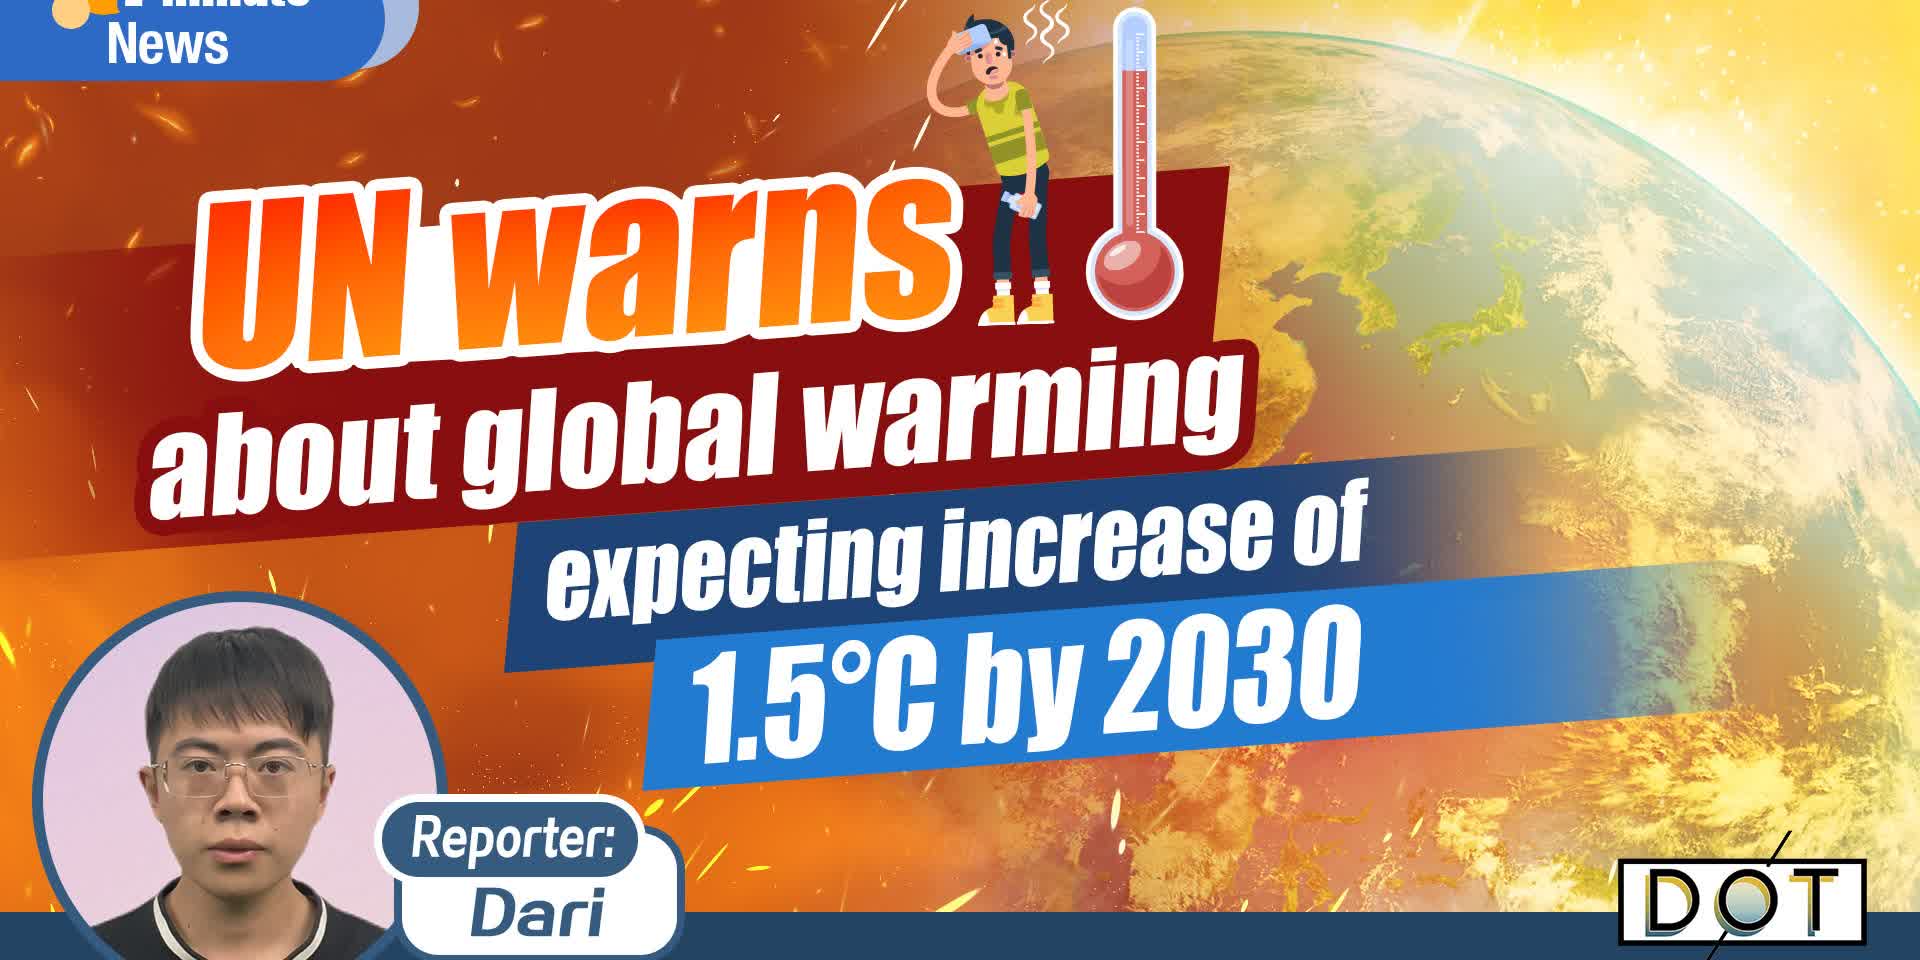 1-minute News | UN warns about global warming, expecting increase of 1.5°C by 2030